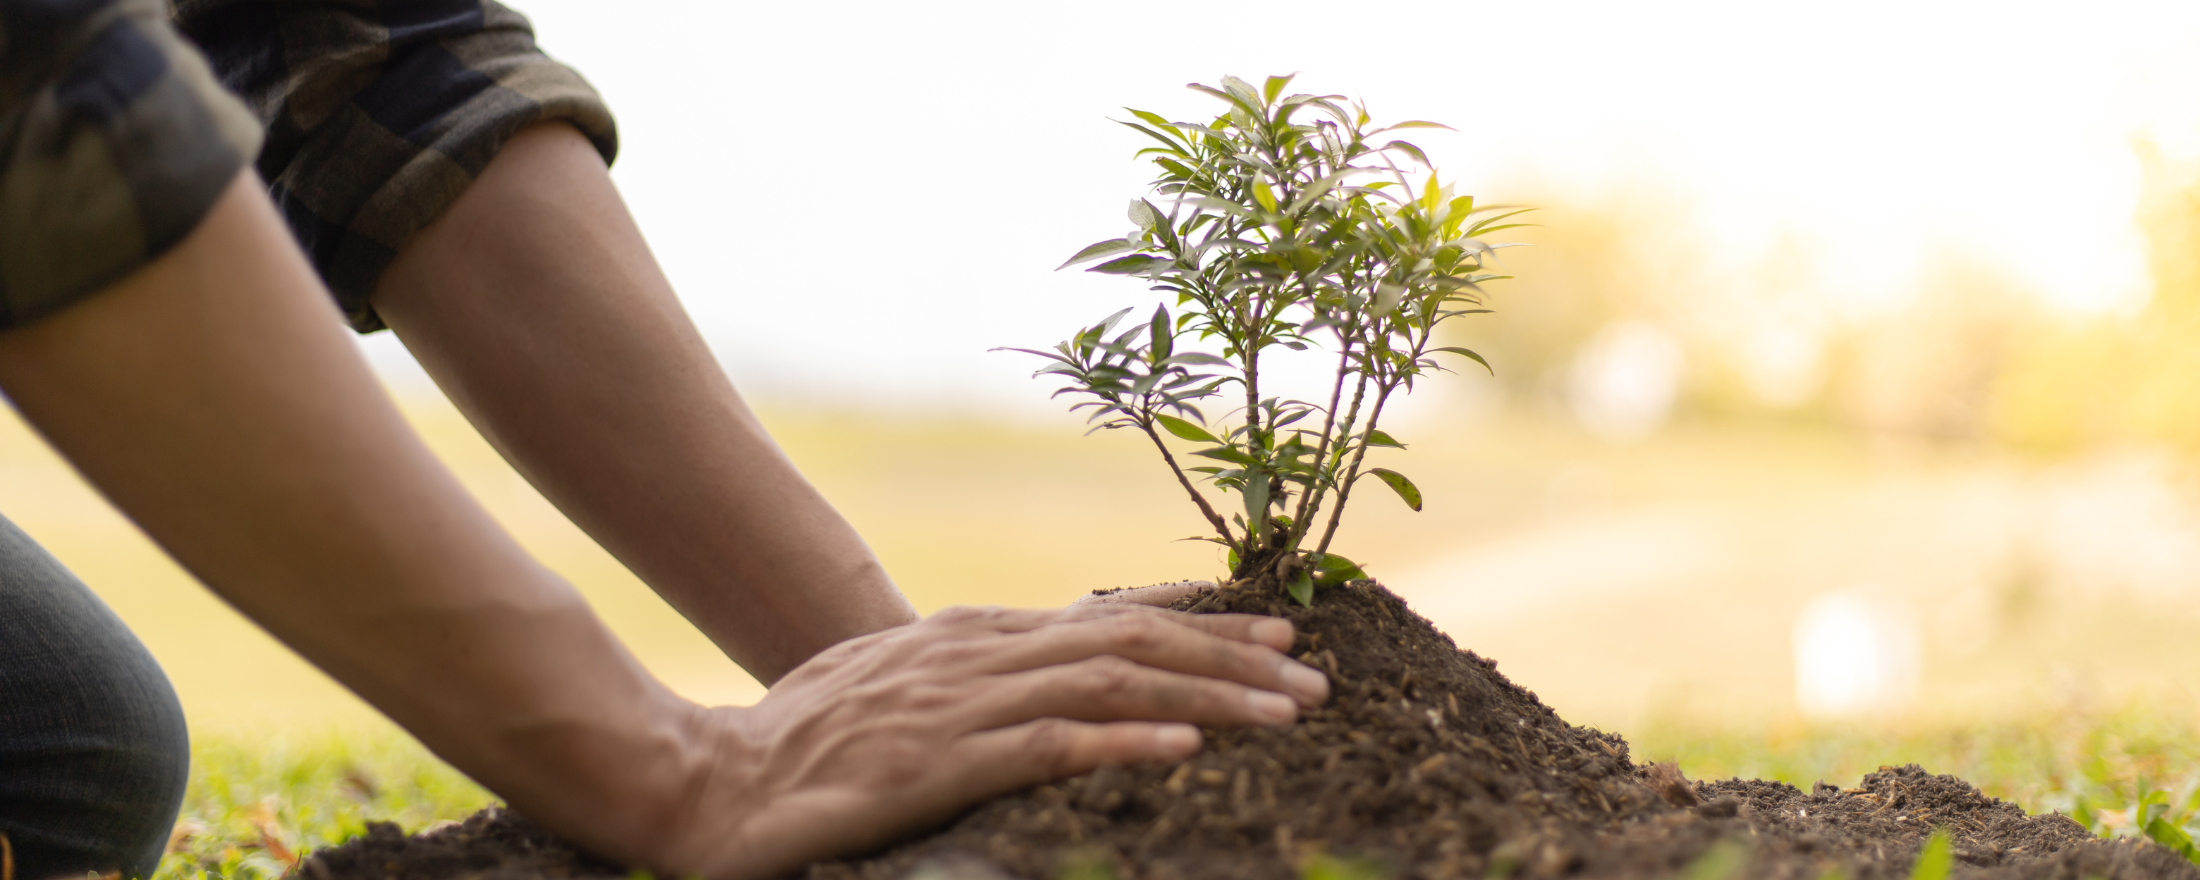 A person is shown planting a small sapling into a patch of soil. The person's hands are visible while planting the sapling, and the soil is visible, as well as some surrounding grass. The image signifies Happy Skin Soap Co.'s commitment to plant a tree for every order.